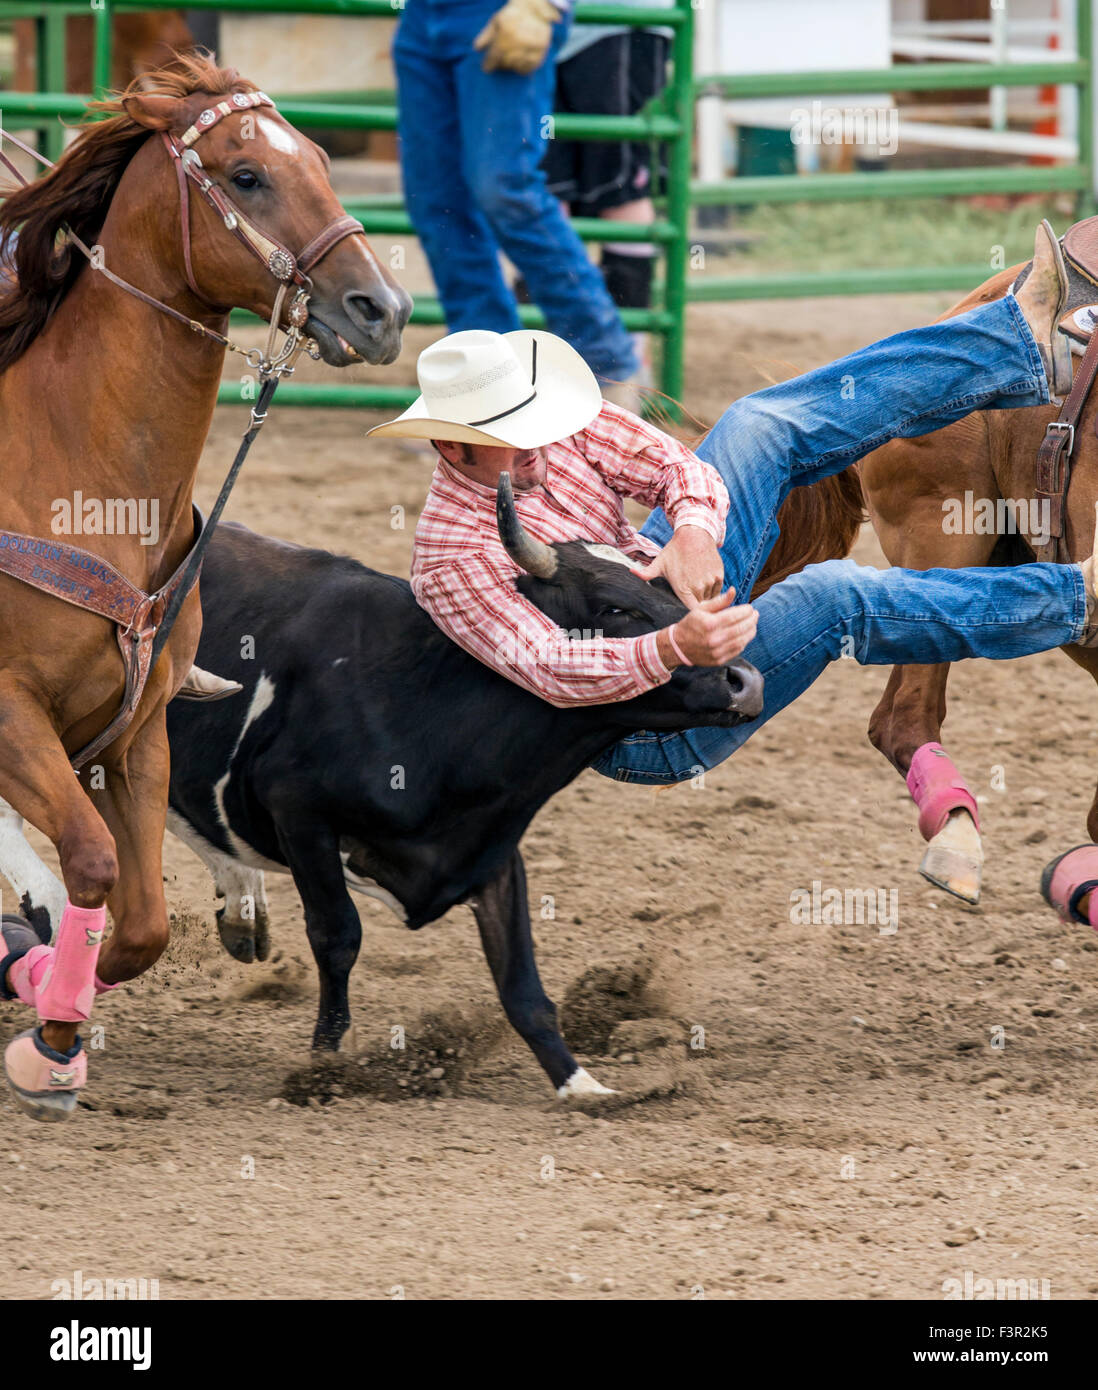 Rodeo cowboys on horseback competing in steer wrestling event, Chaffee County Fair & Rodeo, Salida, Colorado, USA Stock Photo